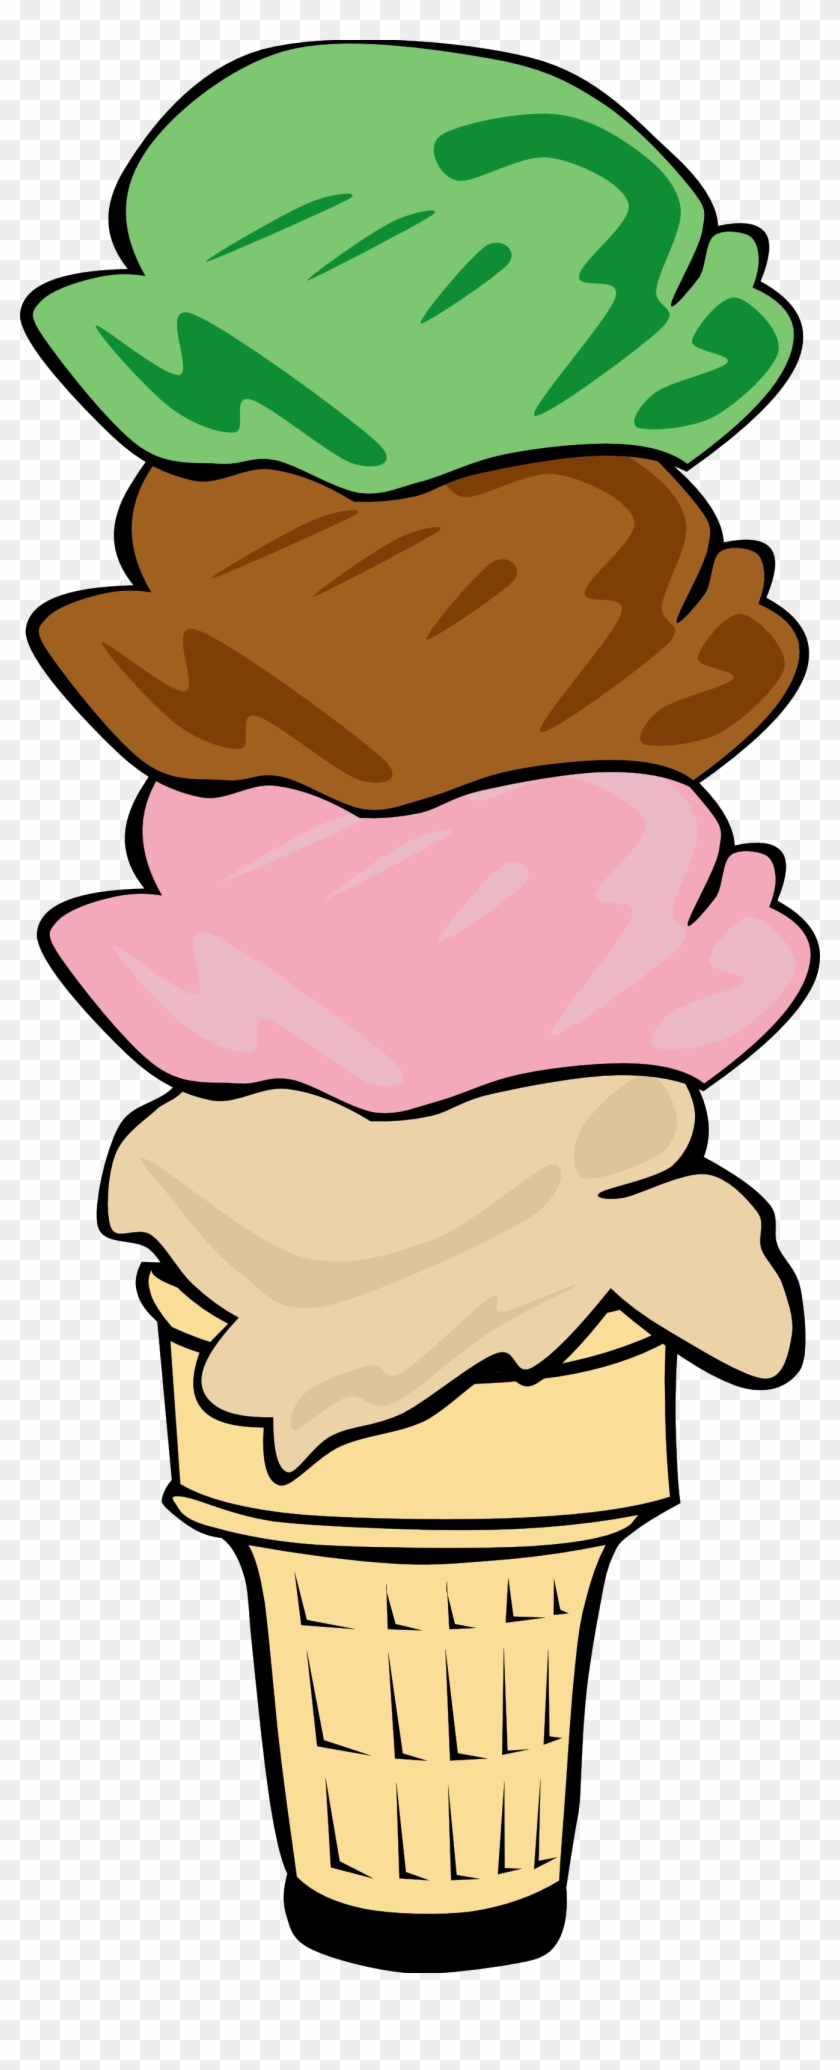 https://www.clipartmax.com/png/middle/21-216094_ice-cream-social-clipart-black-and-white-4-scoops-of-ice-cream.png